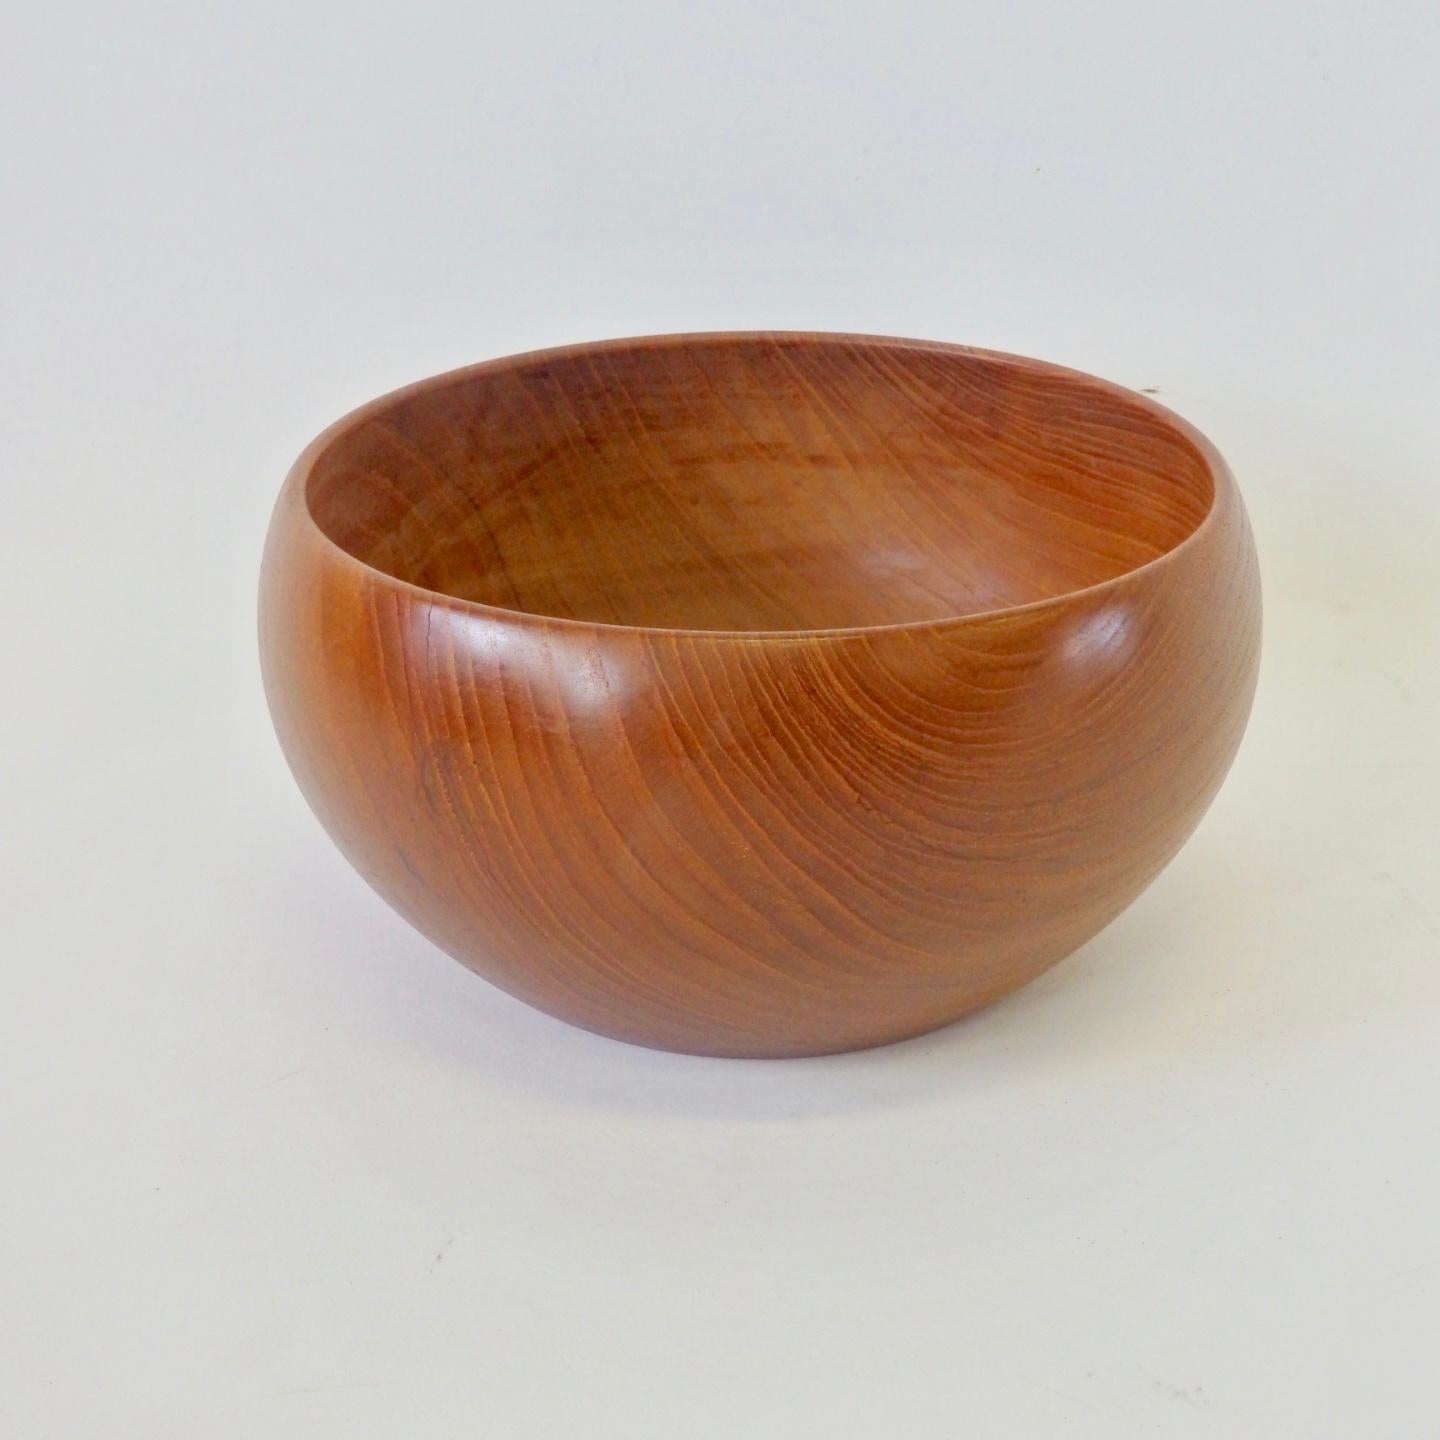 In the style of Kay Bojesen, this turned teak bowl is stamped Illums Bolighus Denmark on the underside. Illums Bolighus, a store with arranged and furnished interiors, where textiles, appointments, and furniture all interacted as art was originally